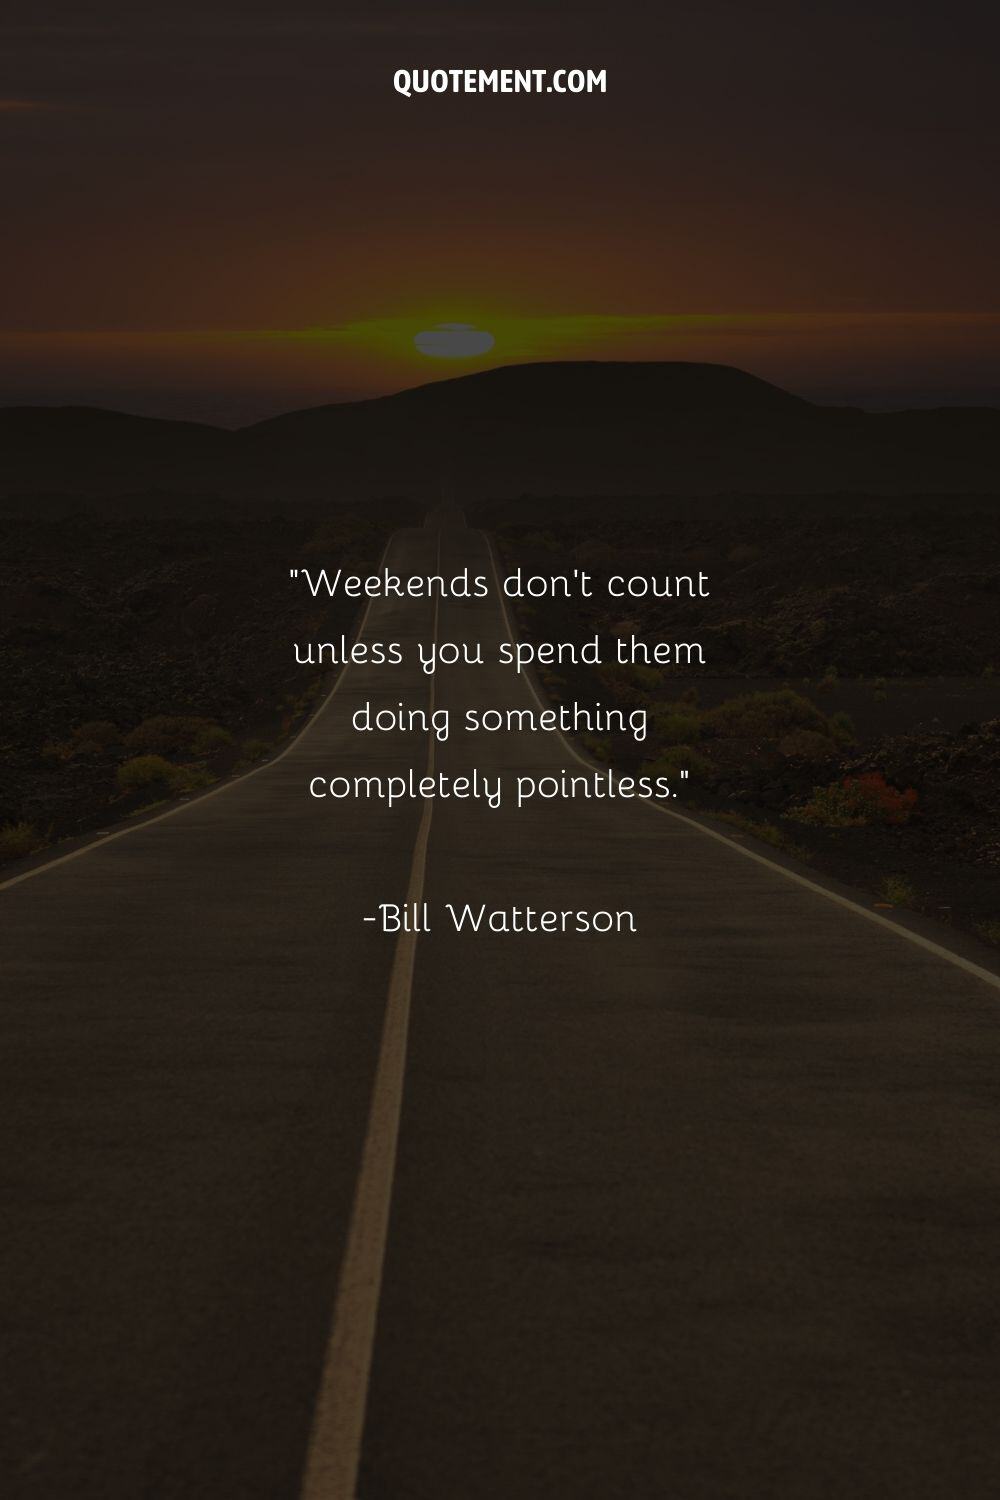 Beautiful image of a sunset representing a quote about weekends
